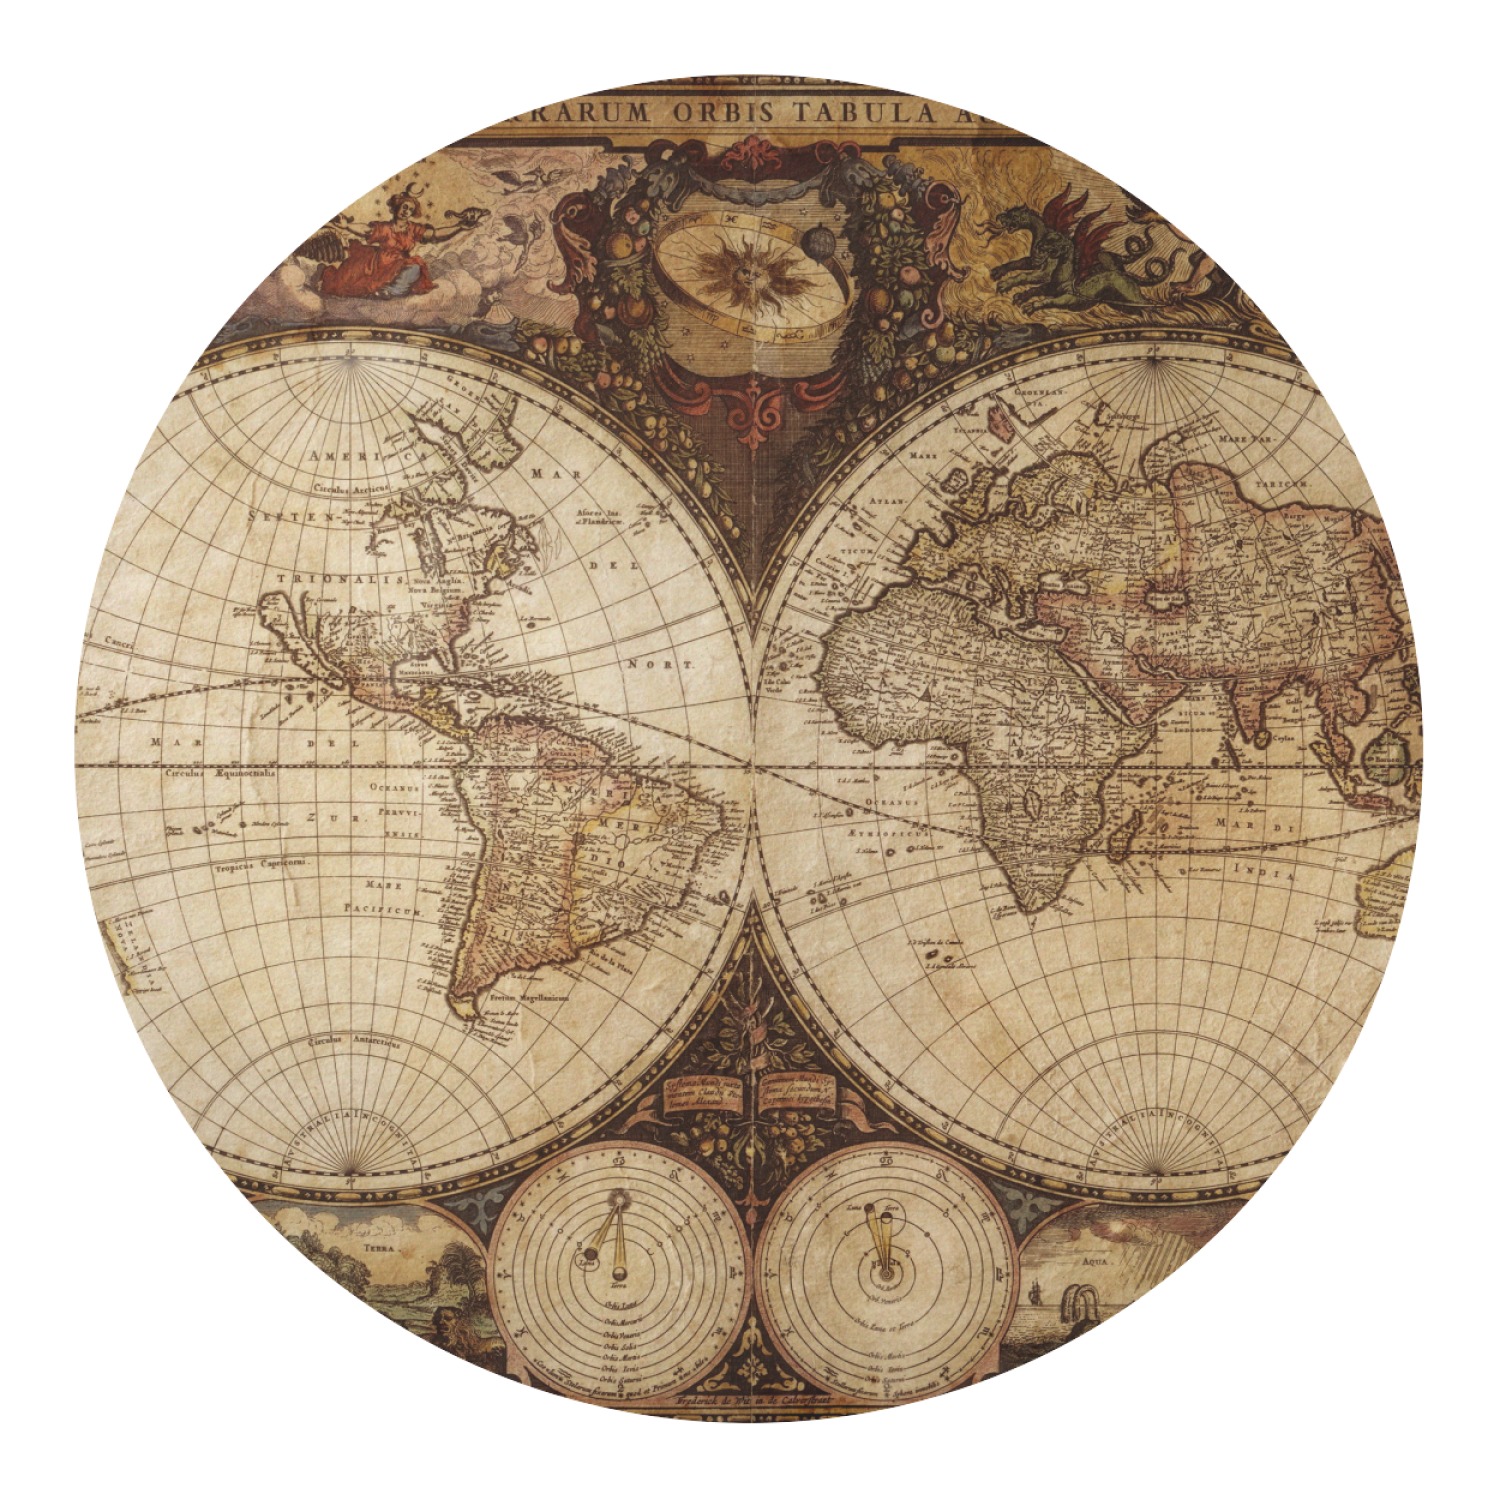 the three major ways the round earth is presented on a flat map include